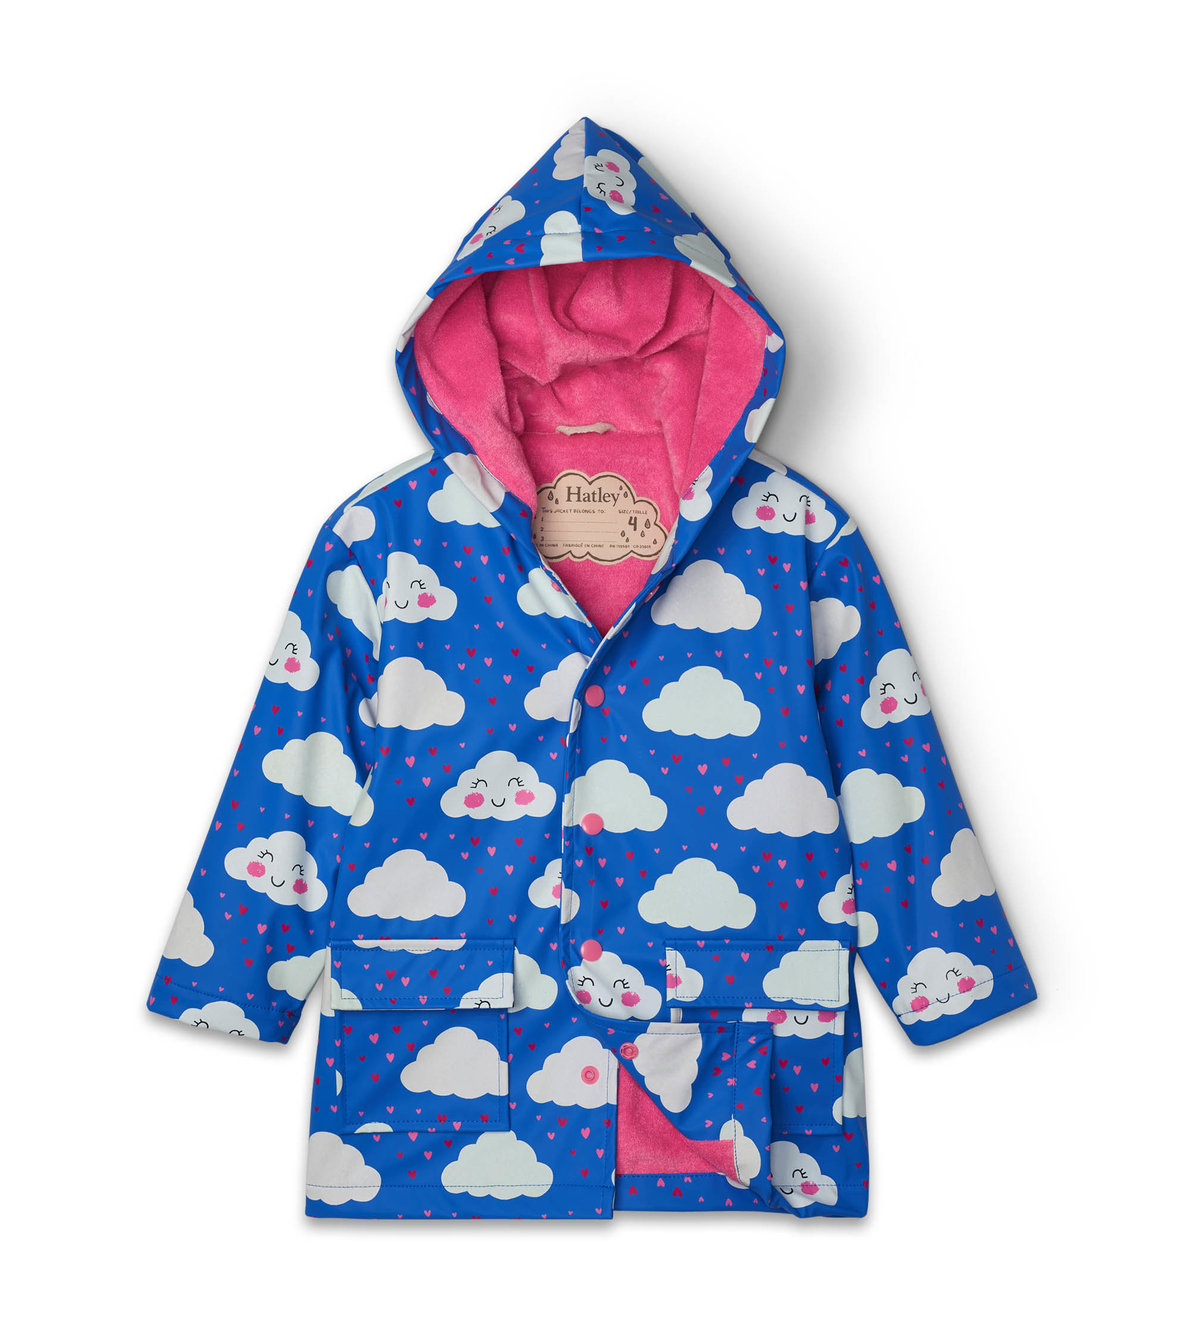 View larger image of Colour Changing Cheerful Clouds Raincoat